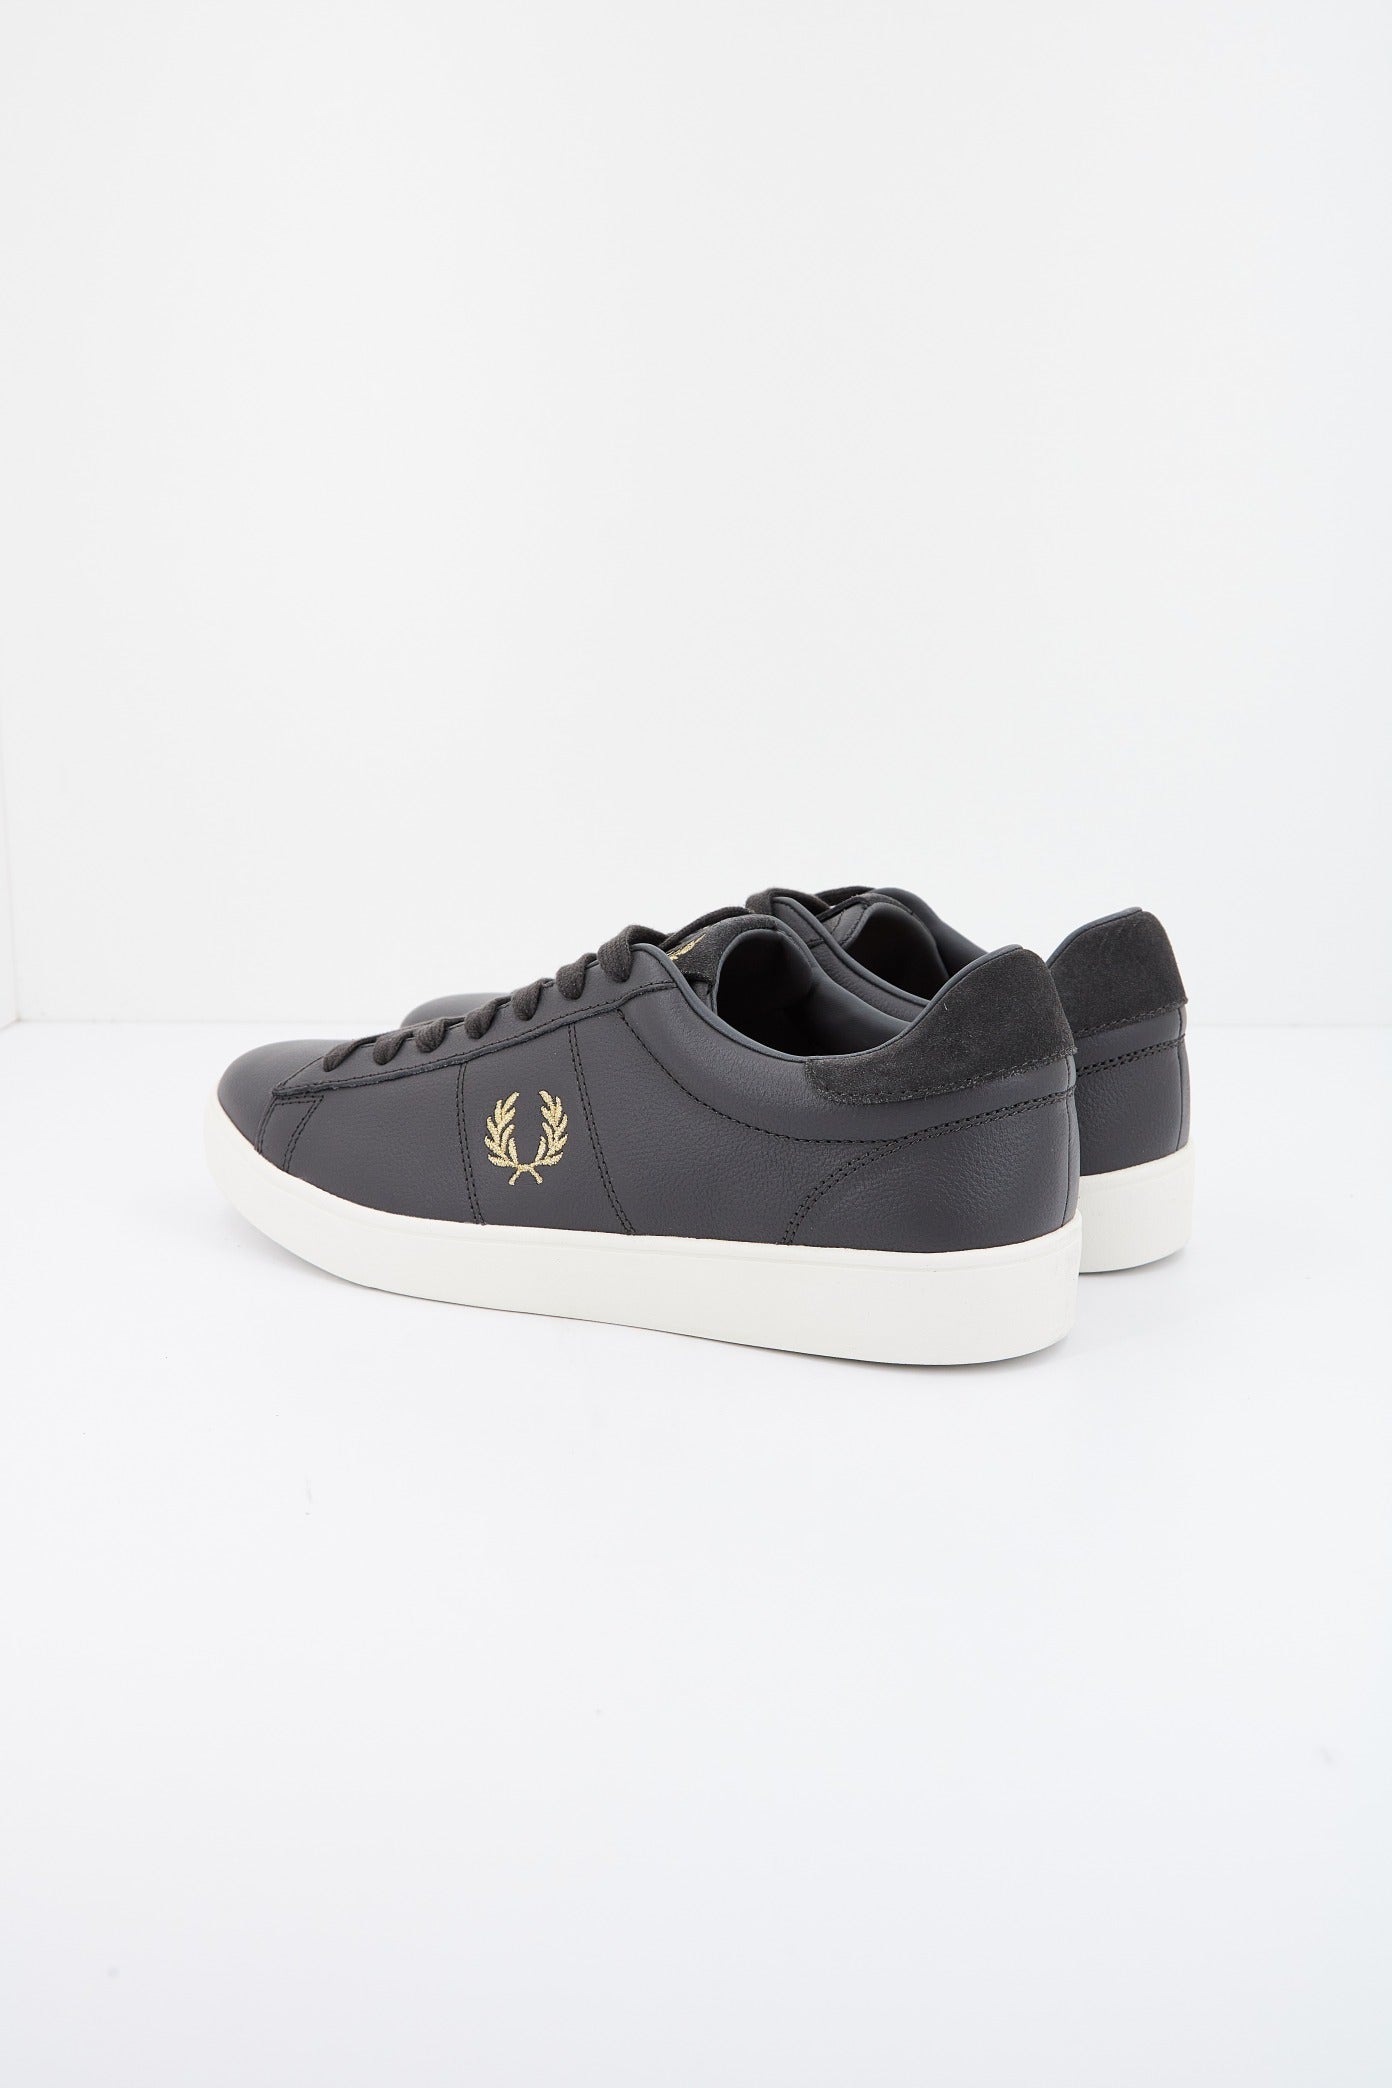 FRED PERRY SPENCER TUMBLED LTH en color GRIS  (3)